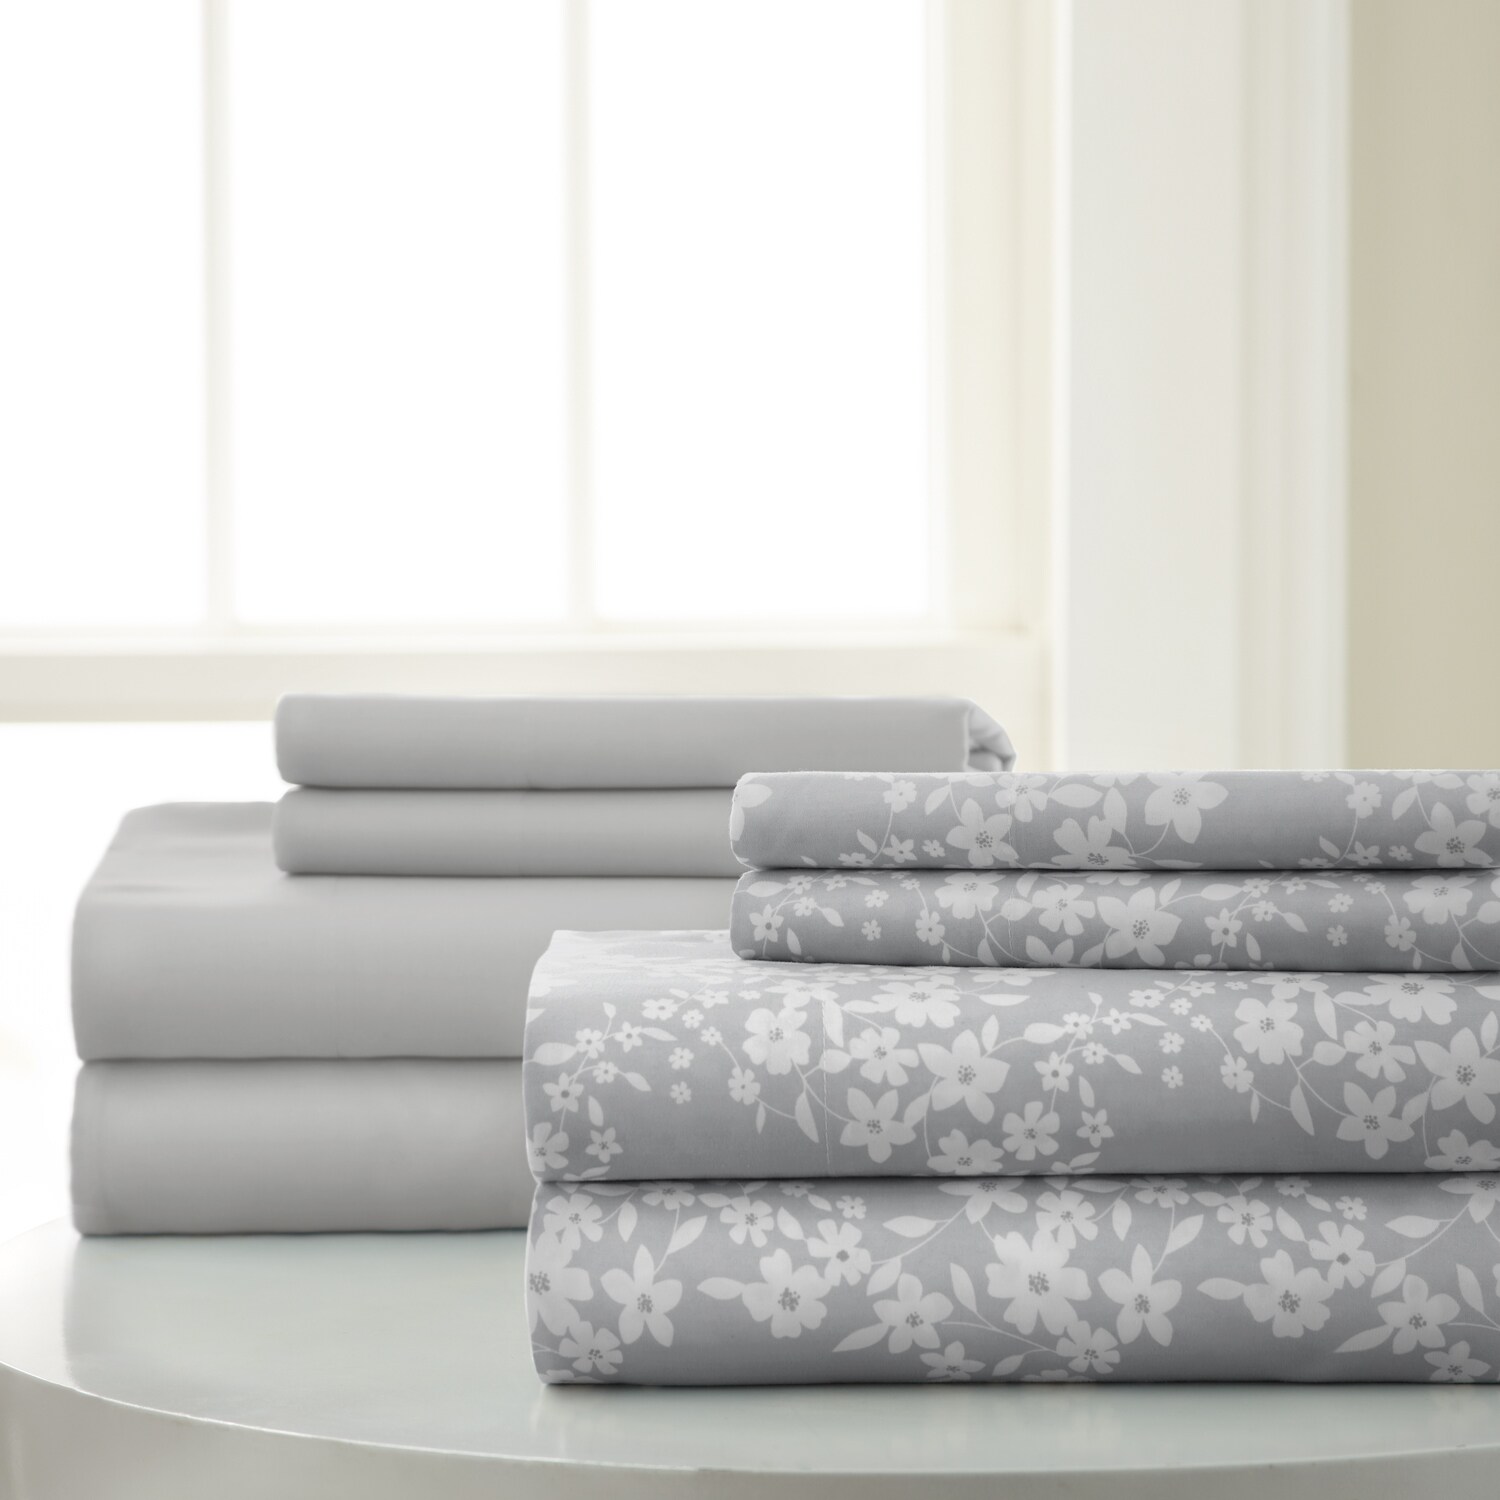 Amrapur Overseas Bed Sheets and Pillowcases - Bed Bath & Beyond